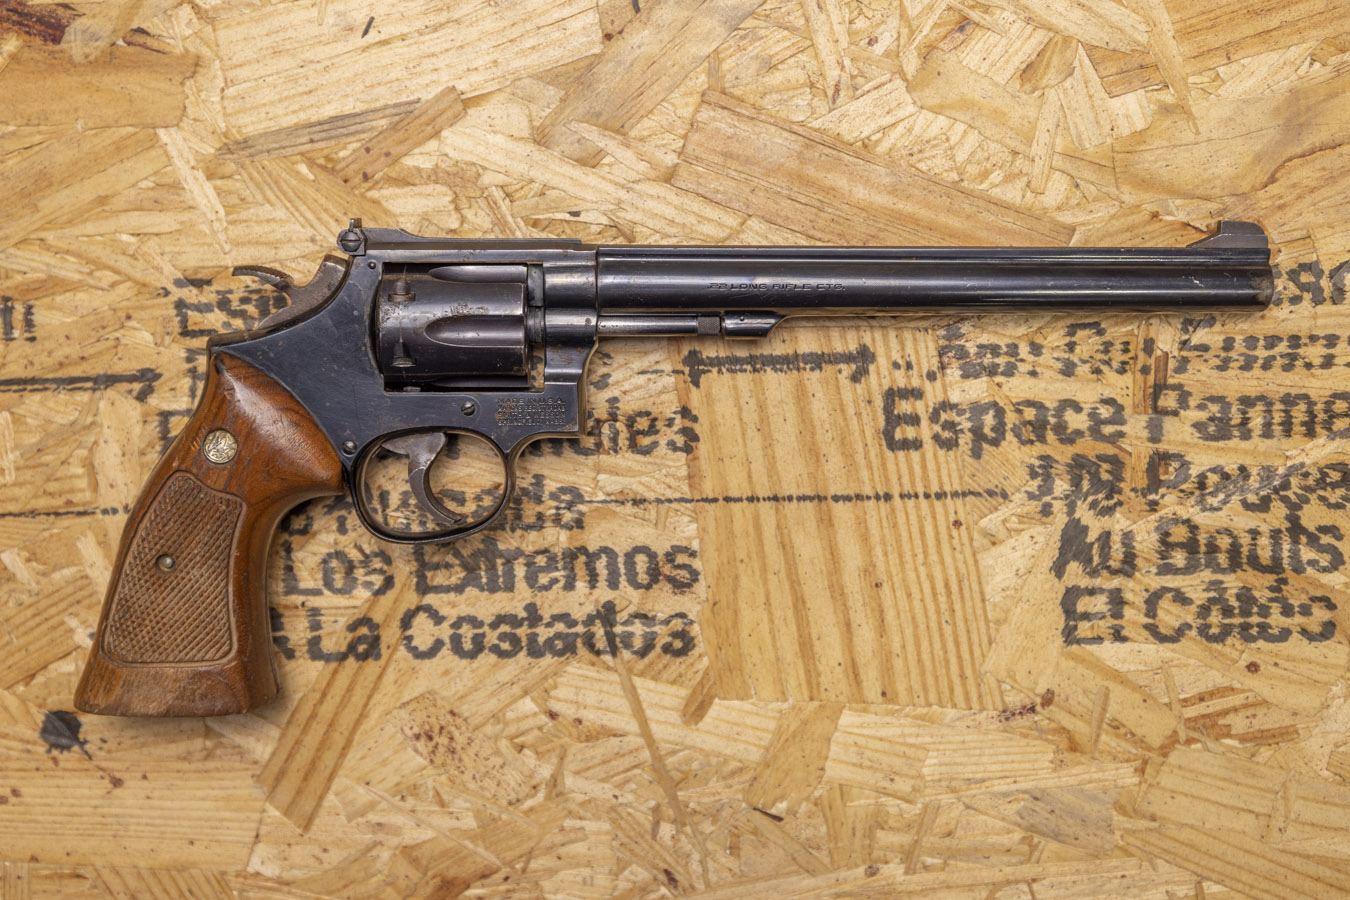 SMITH AND WESSON 17-4 .22LR POLICE TRADE-IN REVOLVER